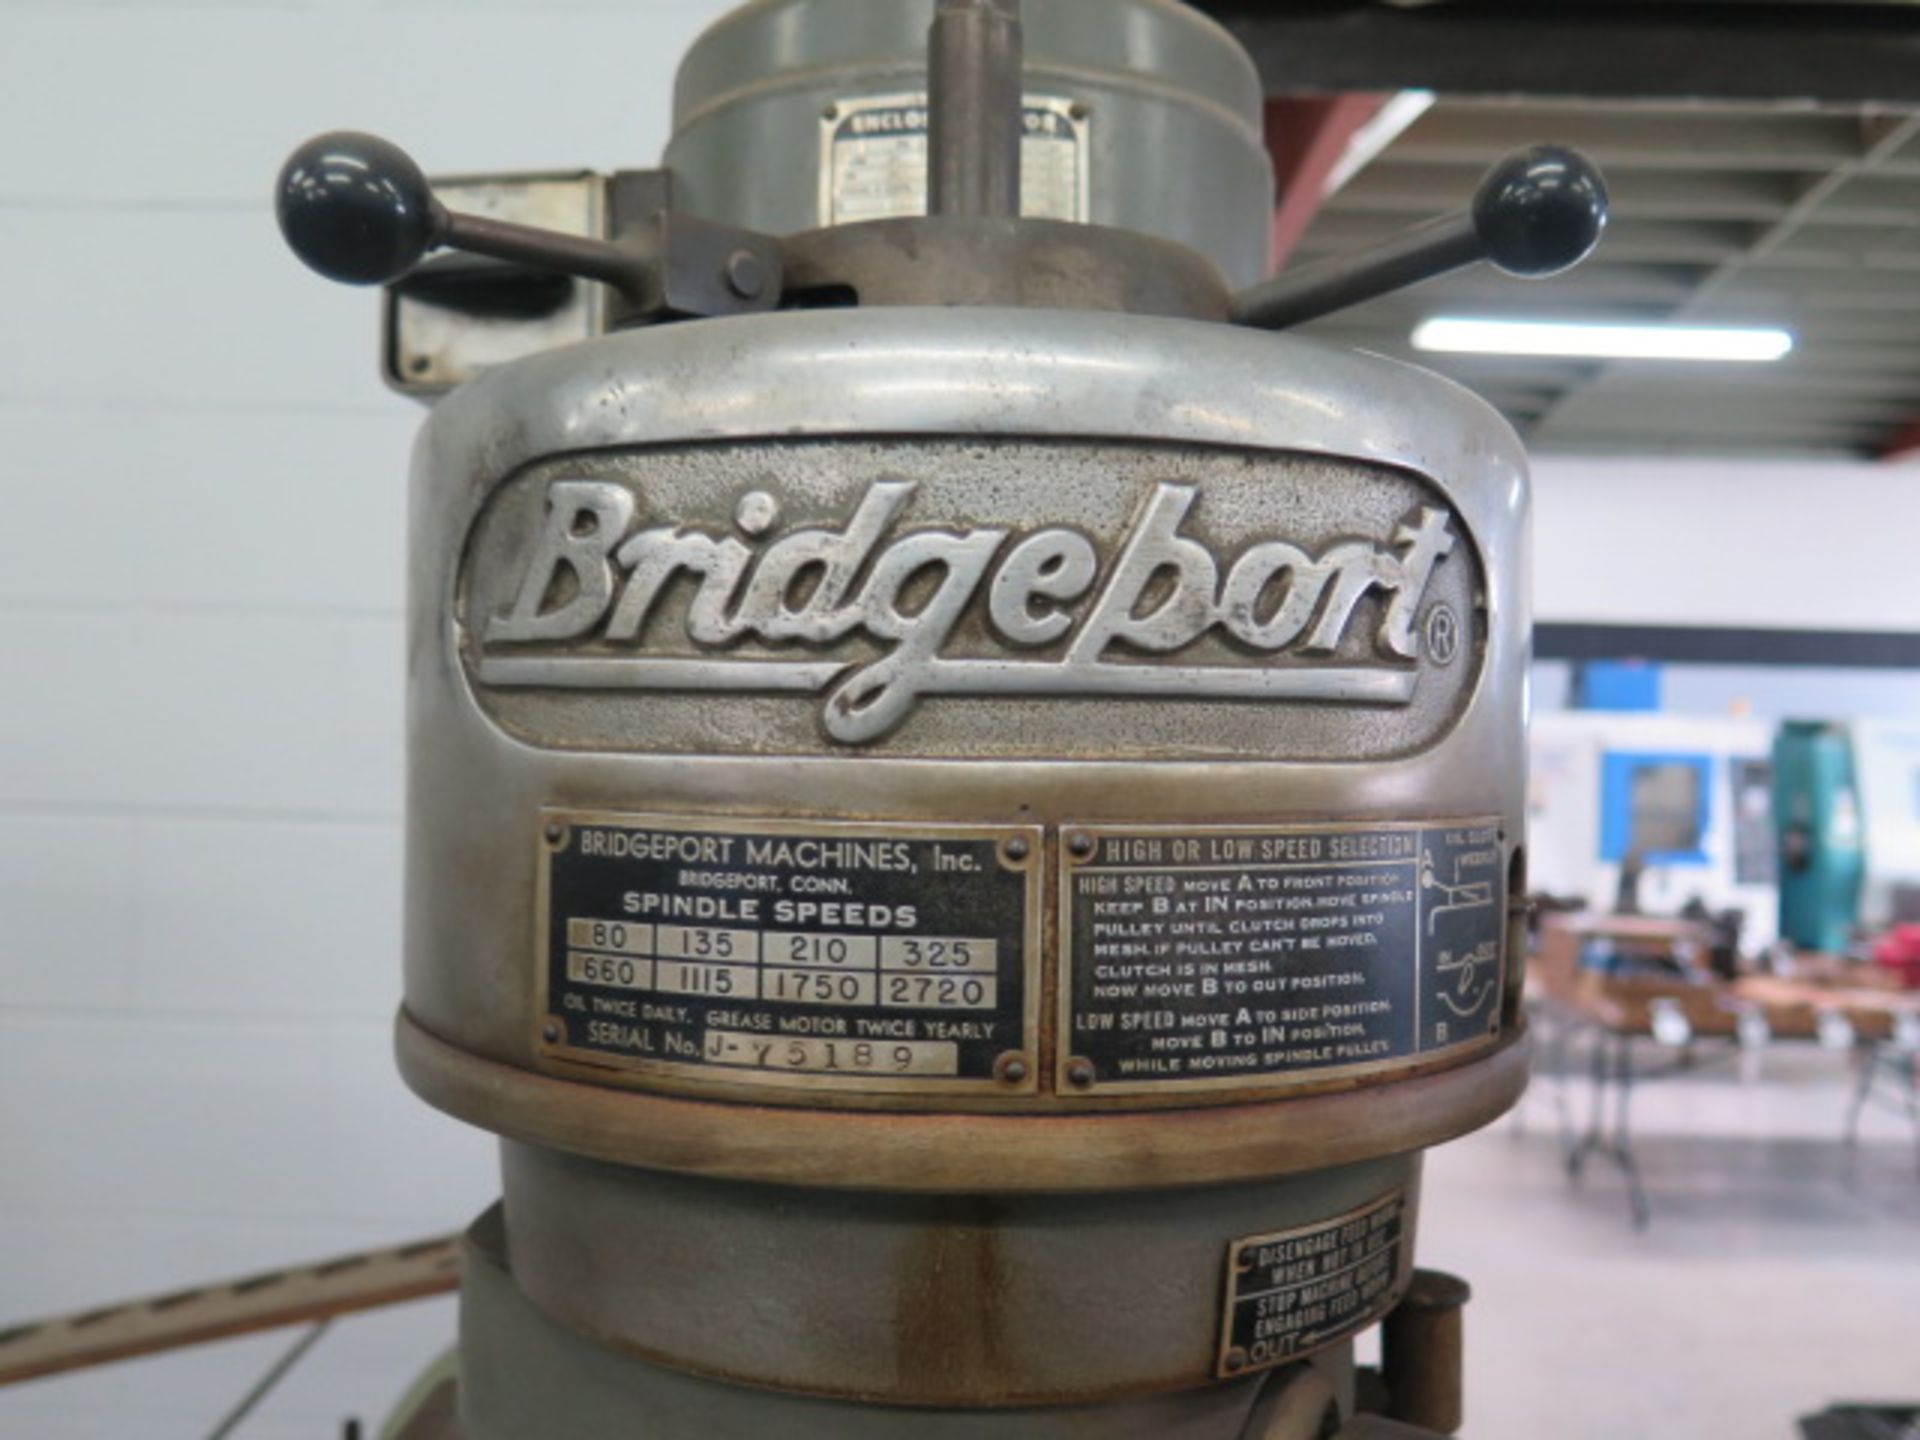 Bridgeport Mill s/n 81175 w/ 1Hp Motor, 80-2720 RPM, 8-Speeds, Power Feed,9" x 42" Table, SOLD AS IS - Image 7 of 7